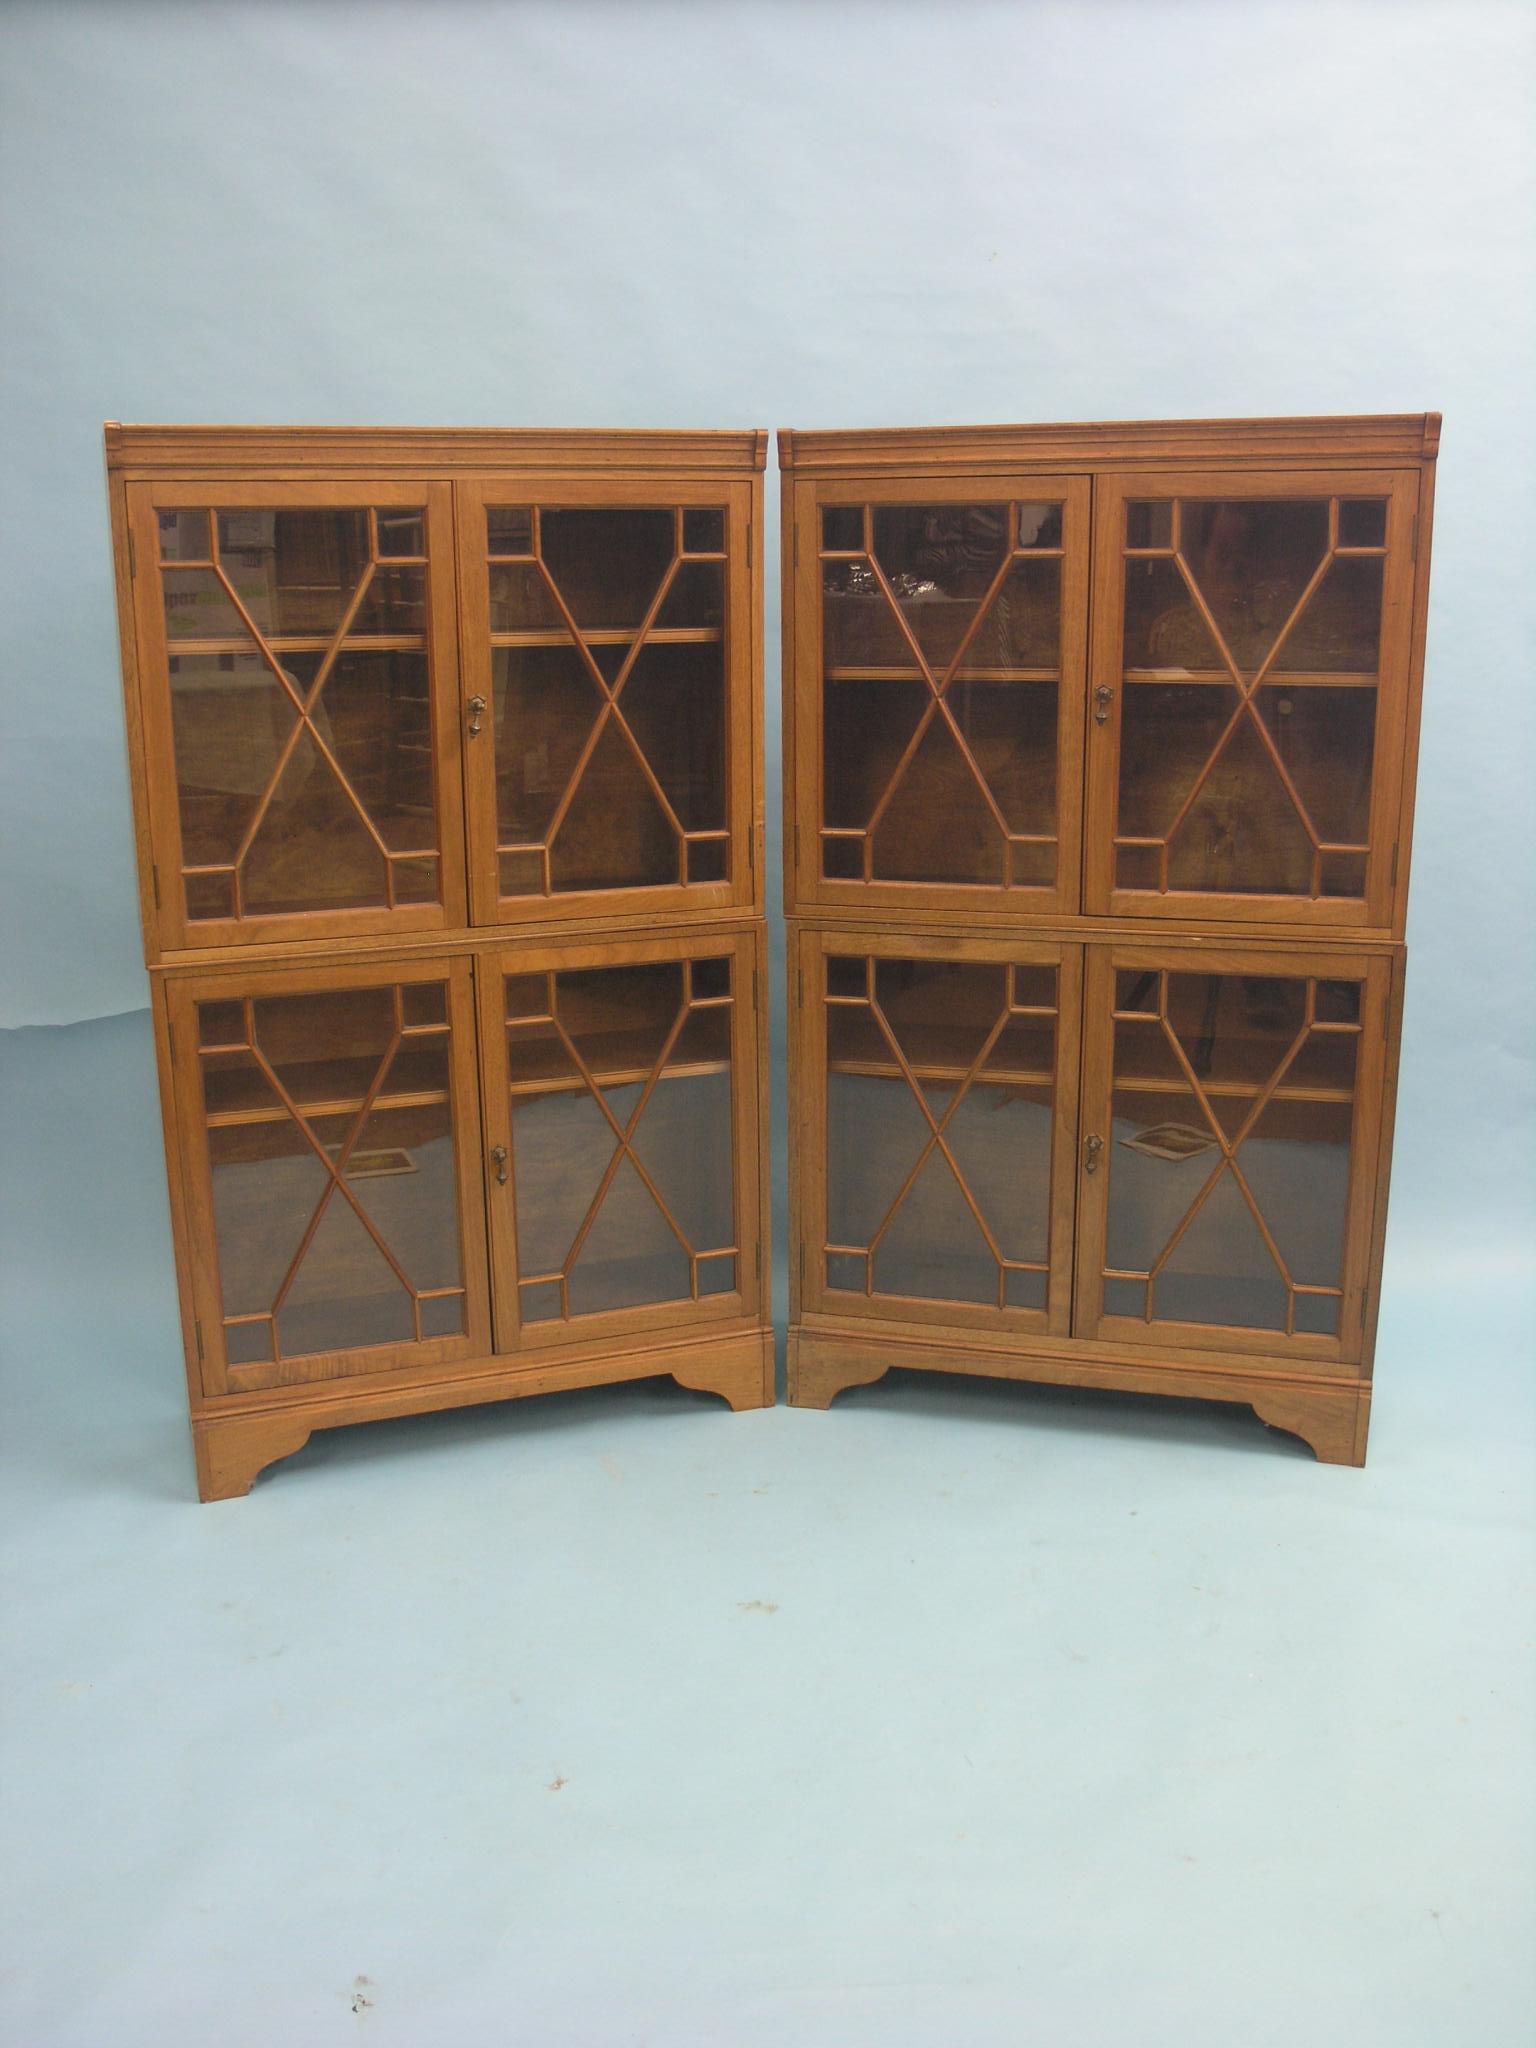 A pair of solid walnut bookcases, Morris & Co. Art-Workers Ltd., each in two sections, enclosed by